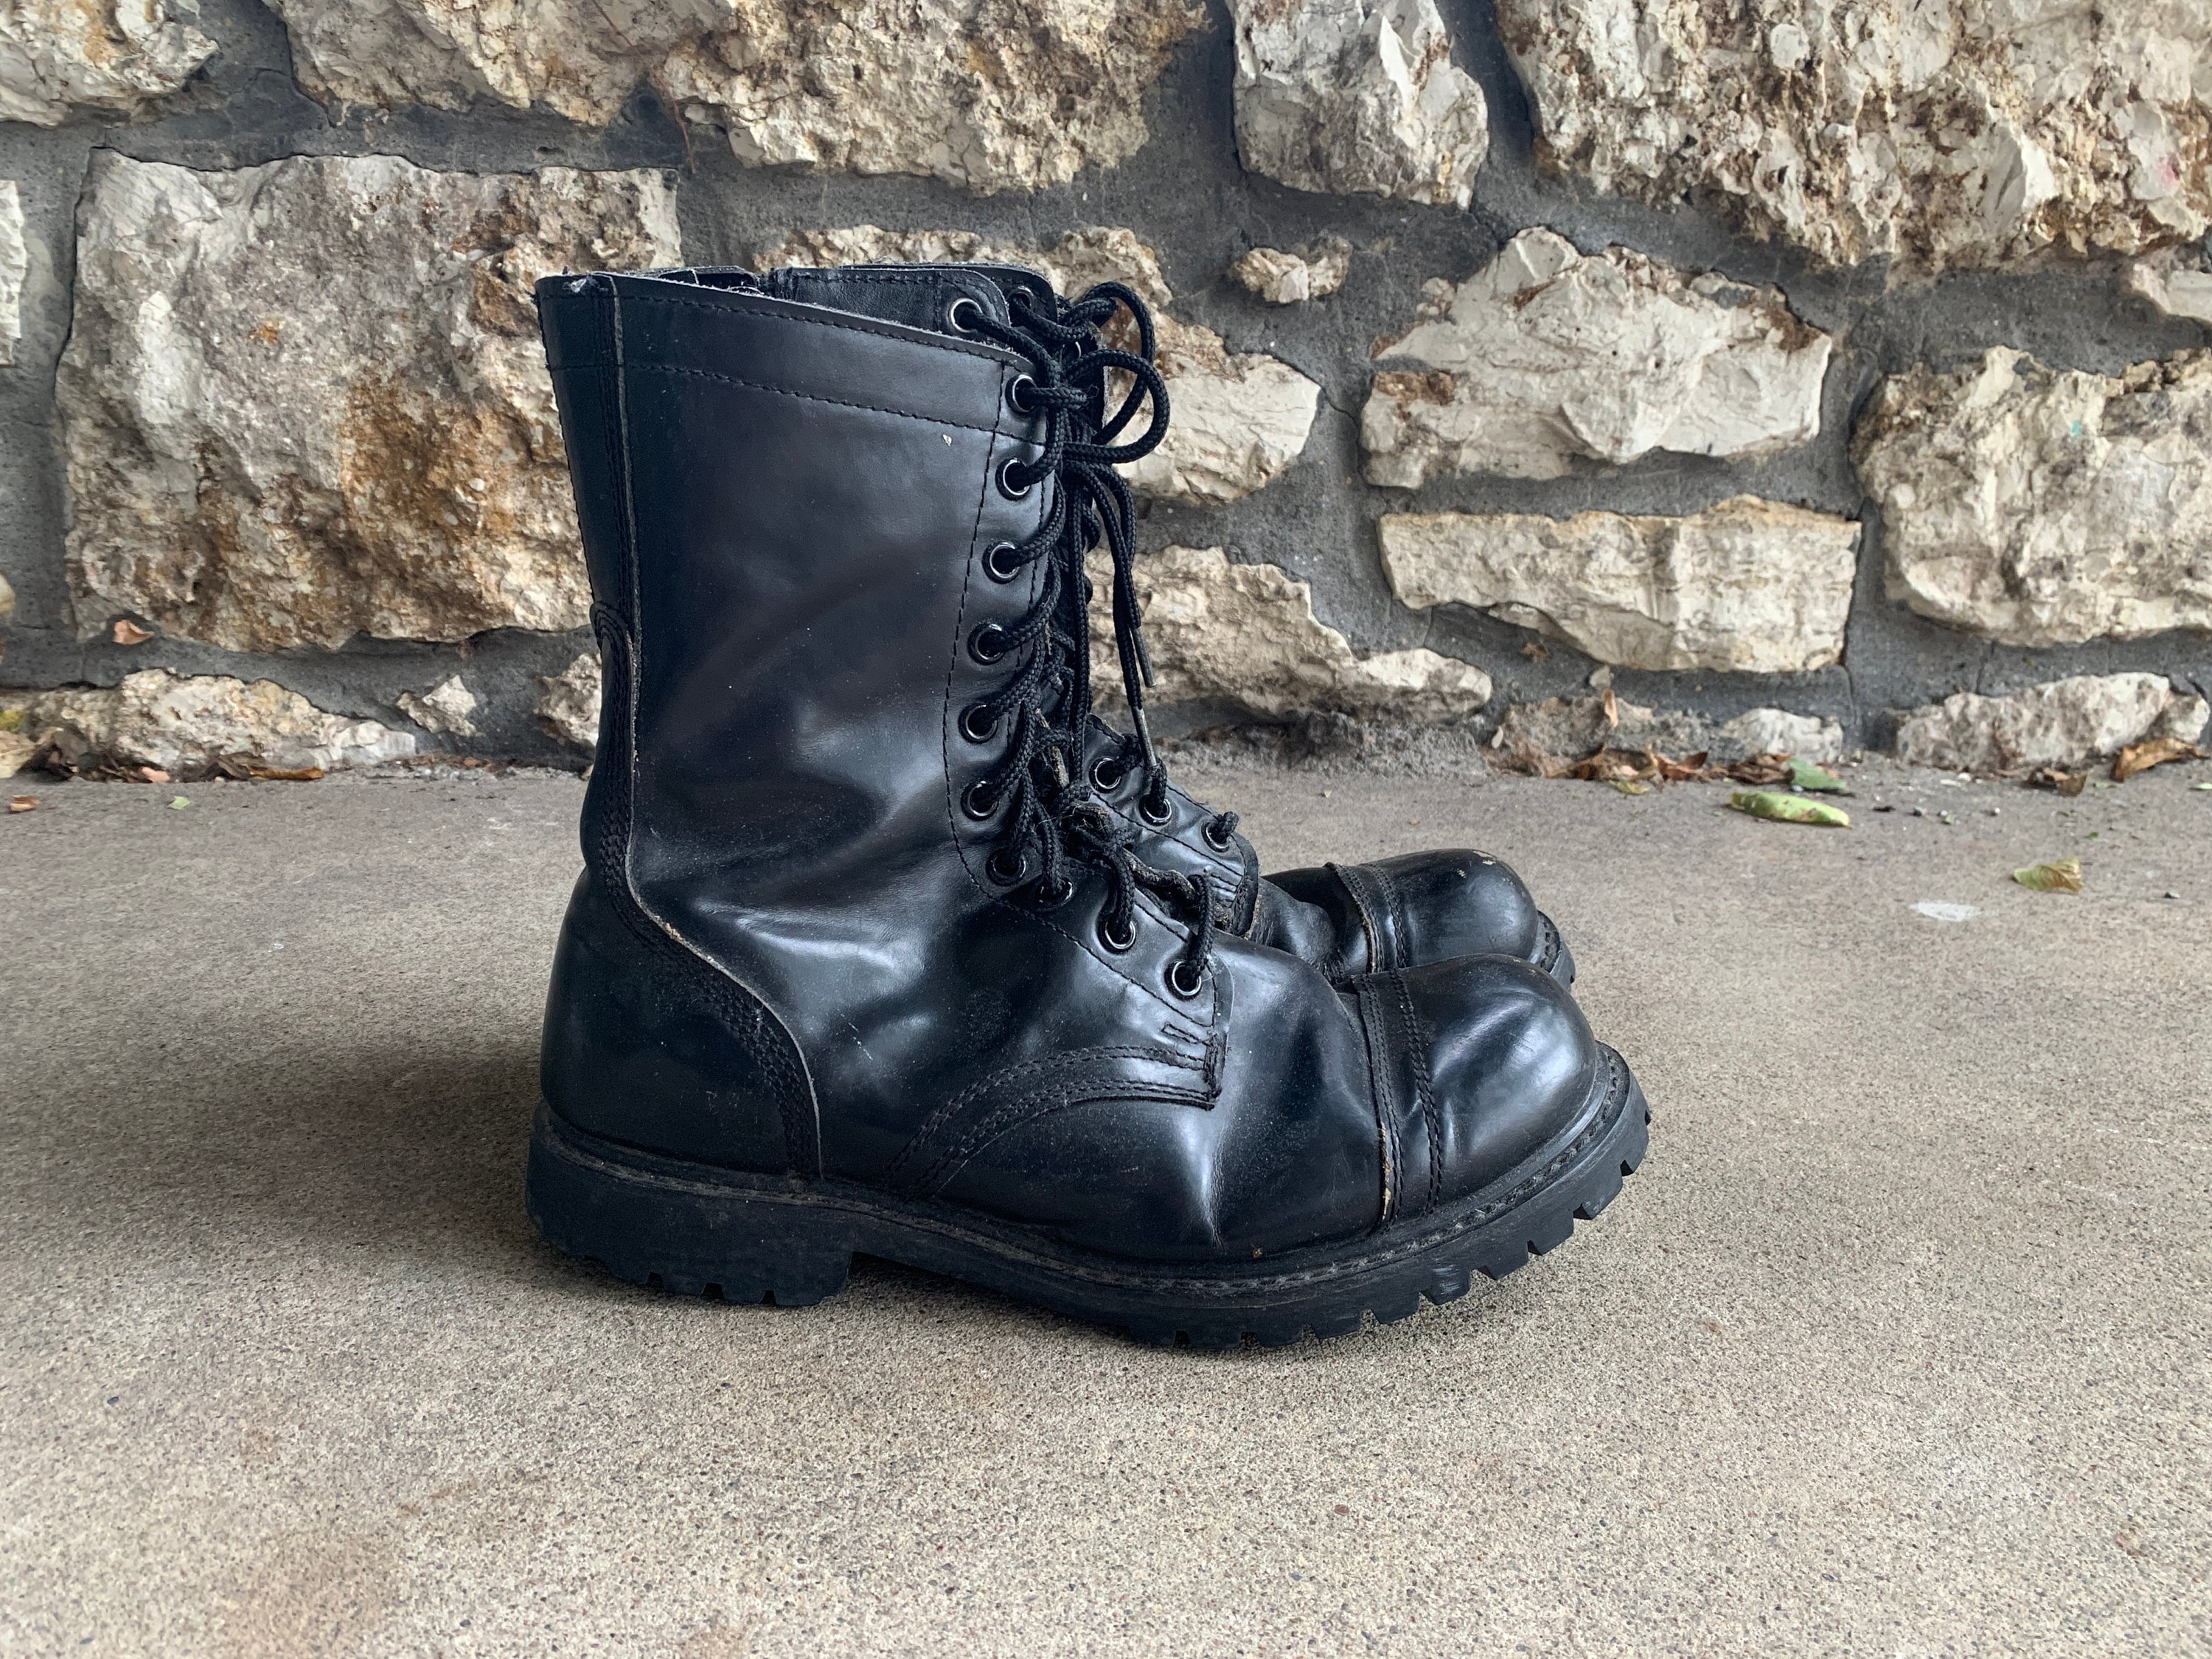 Vintage Corcoran Boots Military EMT Firefighter Police Boots Grunge Punk